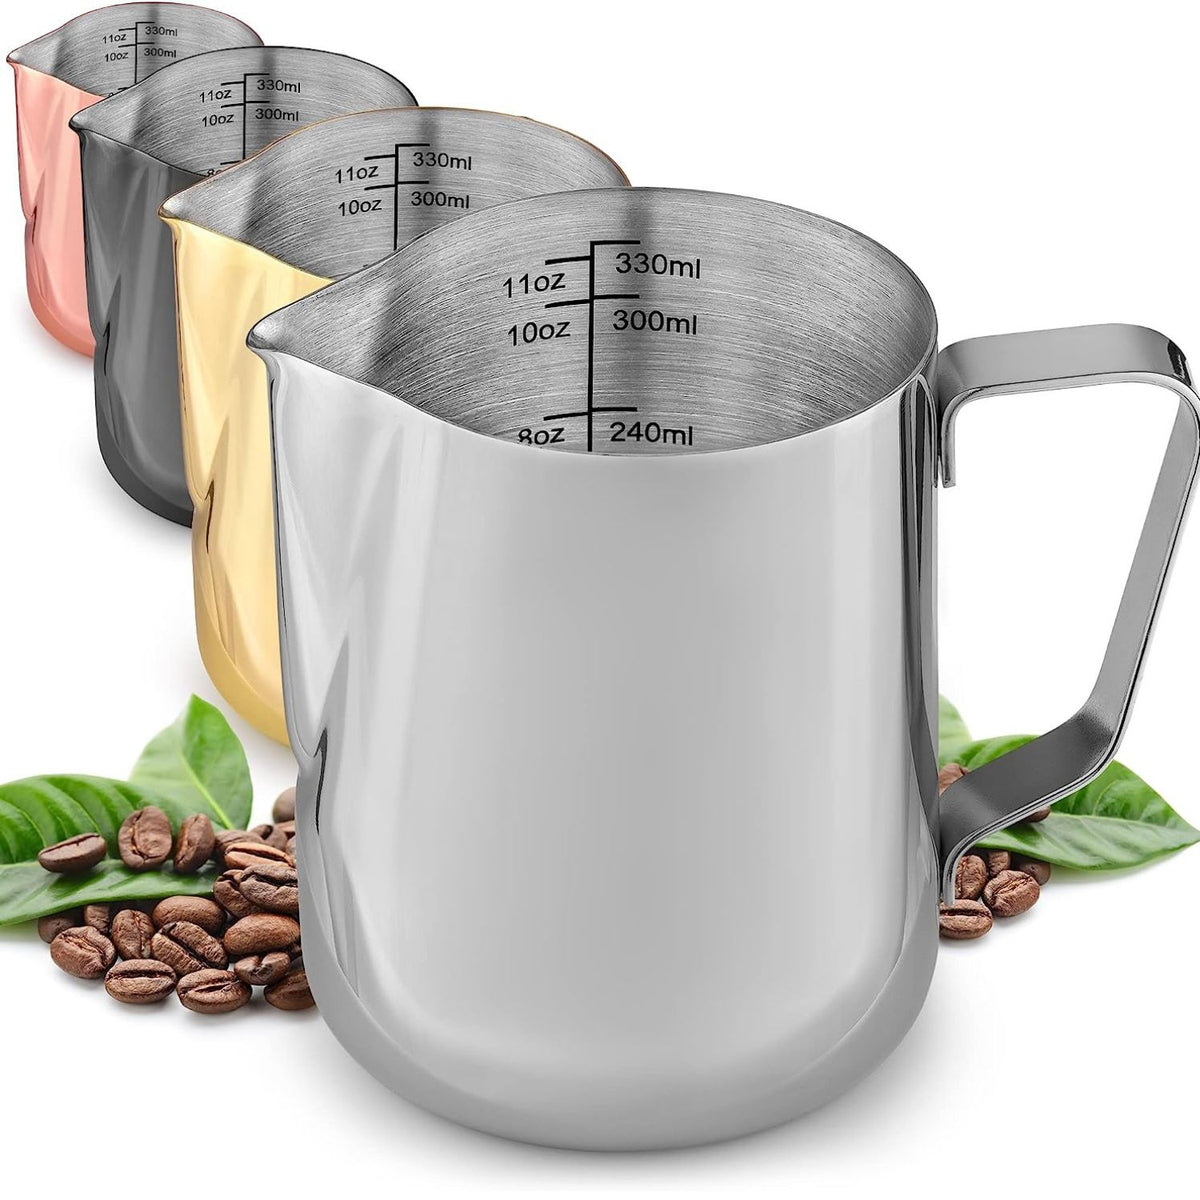 Stainless Steel Milk Frother Pitcher Milk Foam Container Measuring Cups  Coffe Appliance